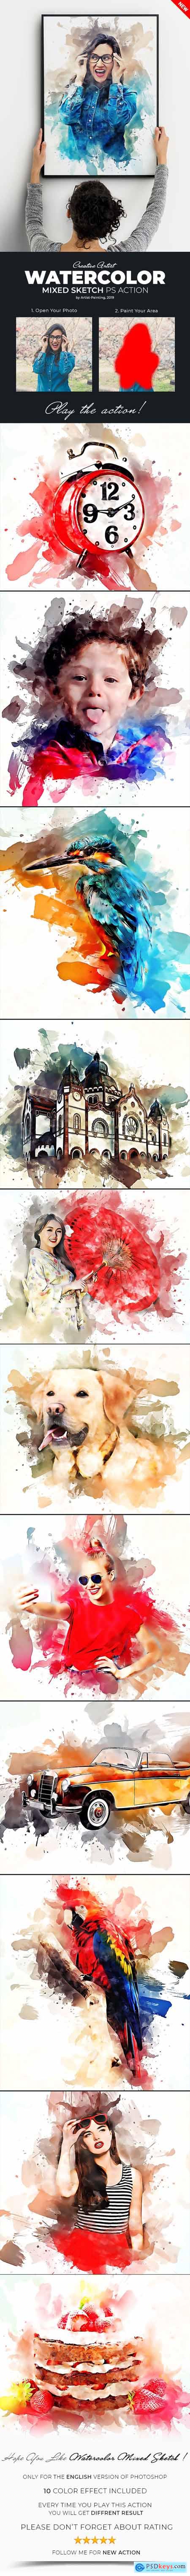 Watercolor Mixed Sketch Photoshop Action 23272022